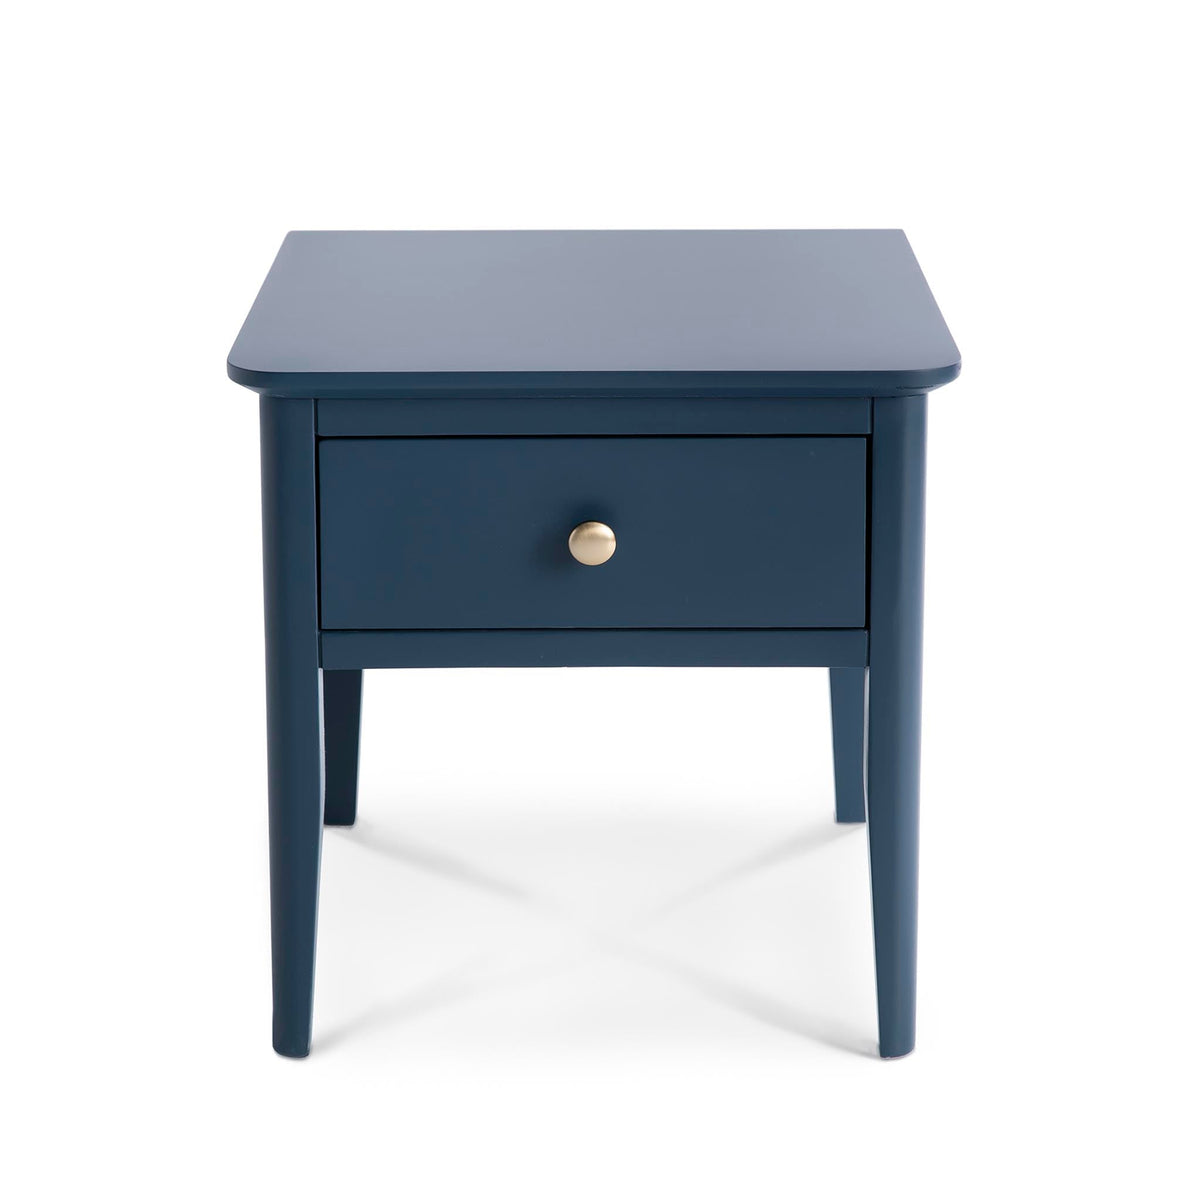 Stirling Blue Side Lamp Table - Front view